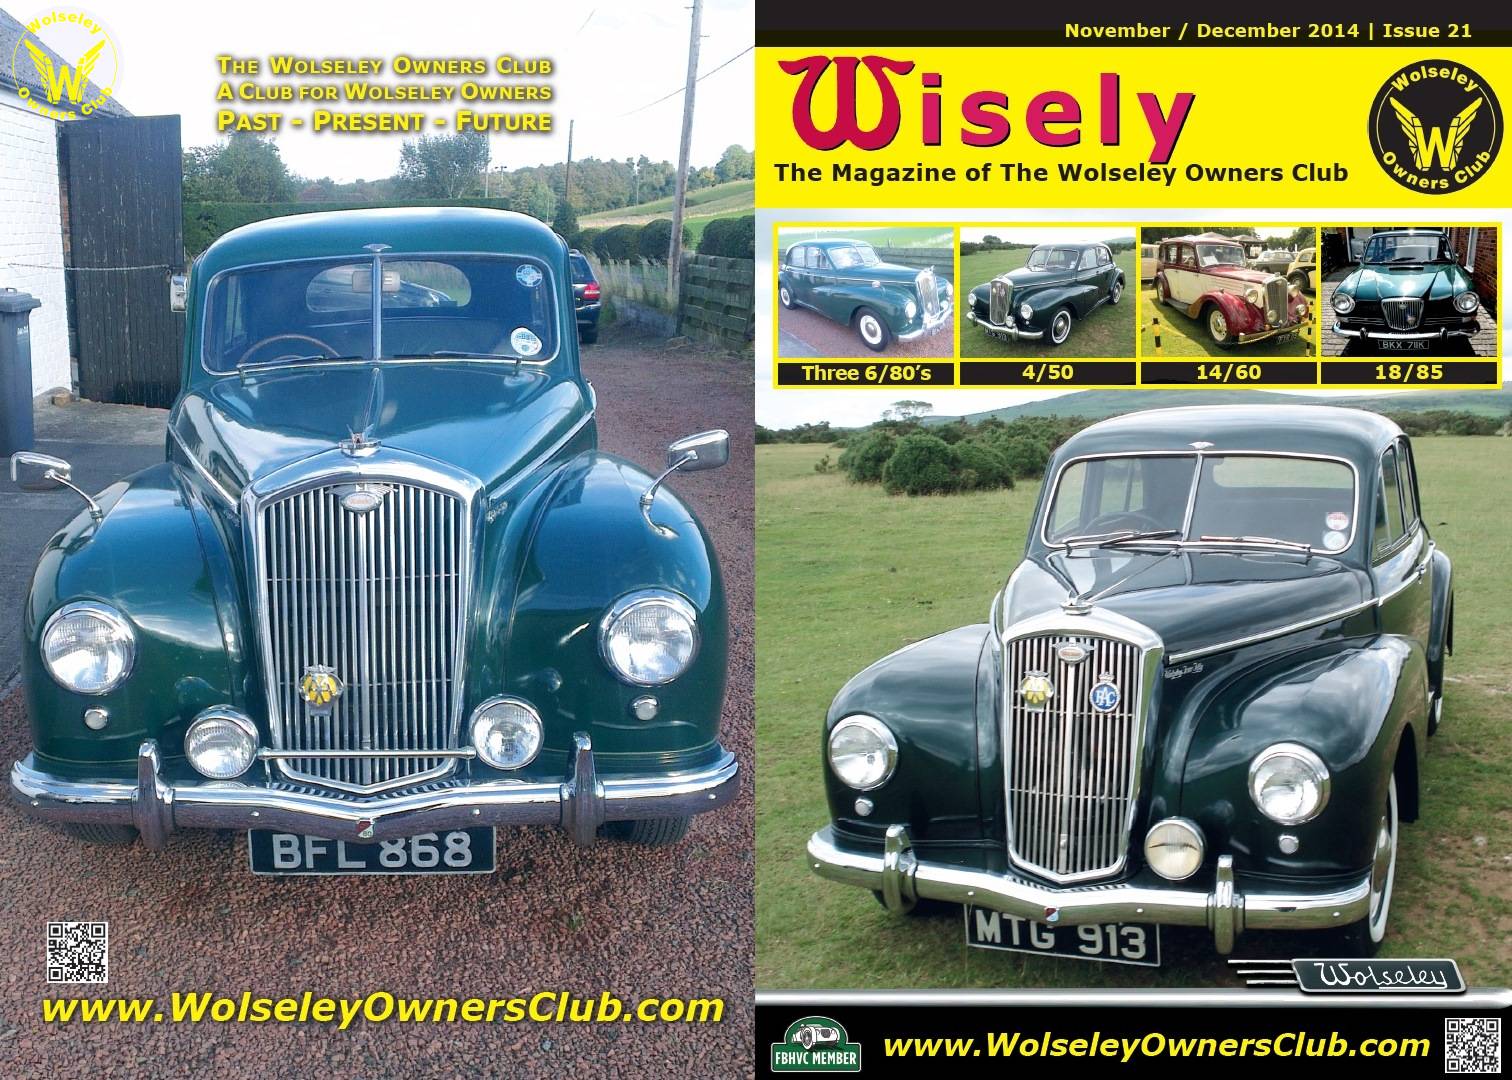 Wisely Issue 21